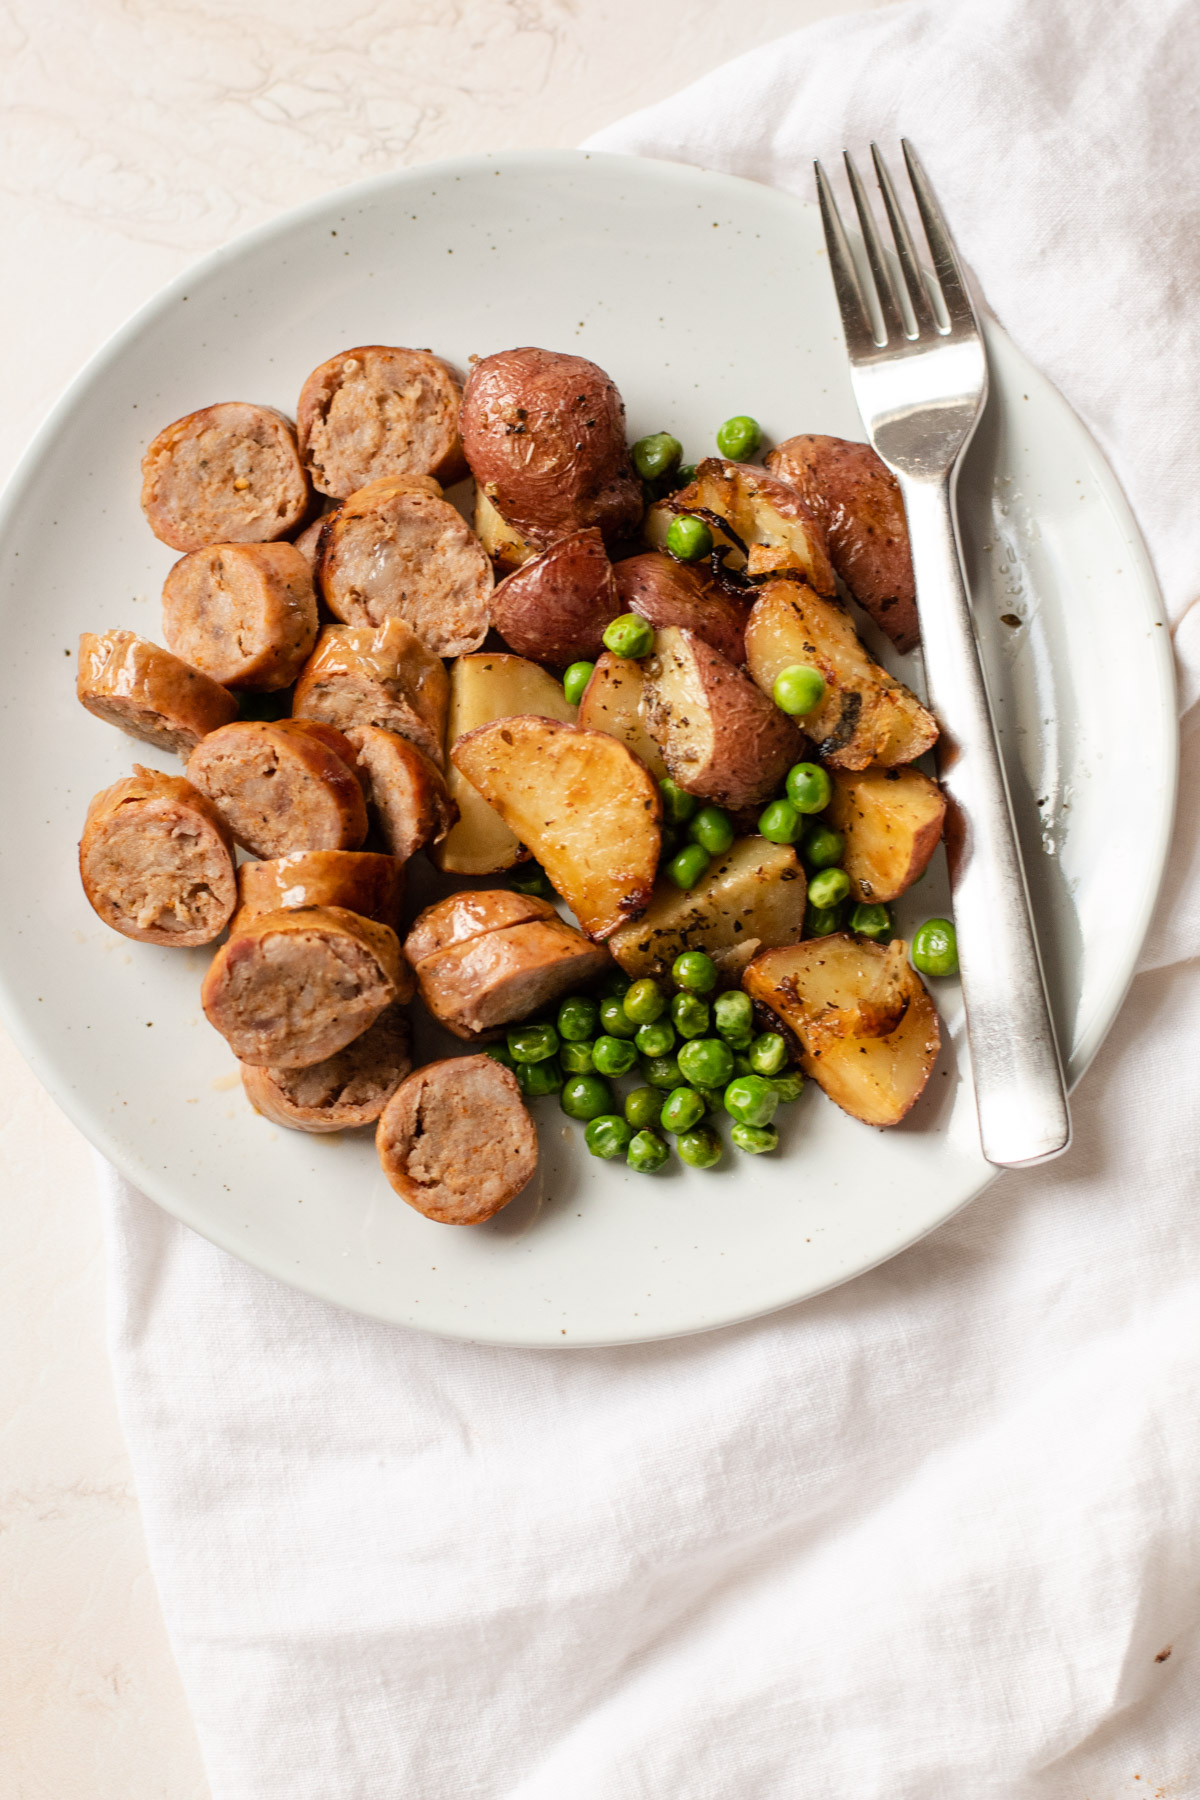 A plate of sausage potatoes and peas.